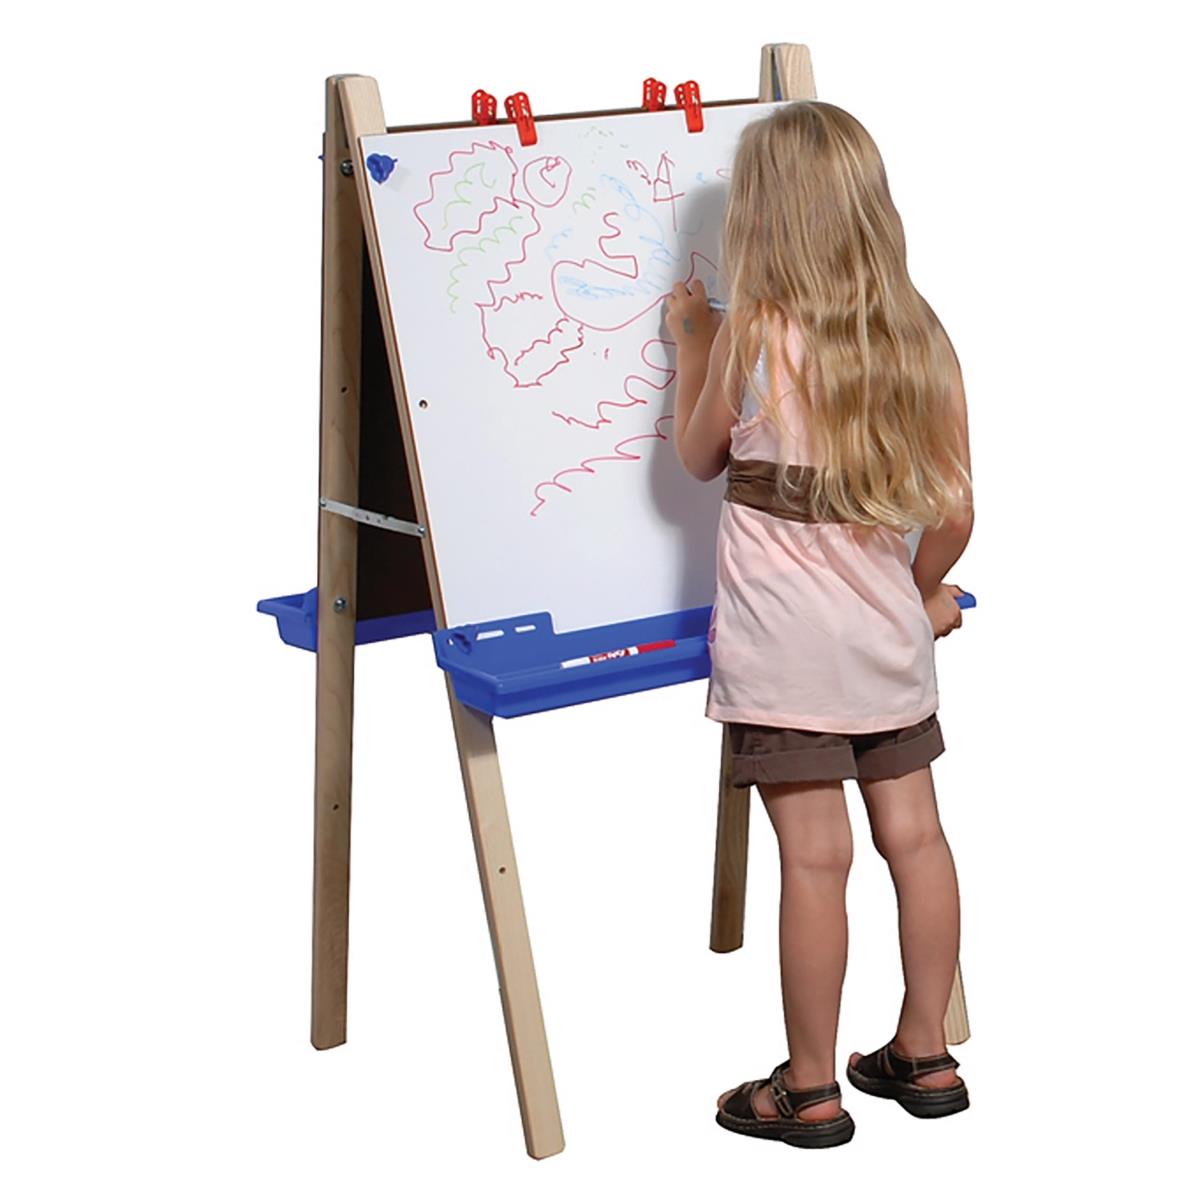 Angeles Ang1034 2 Station Adjustable Whiteboard Easel, 2 X 46 X 23 In.